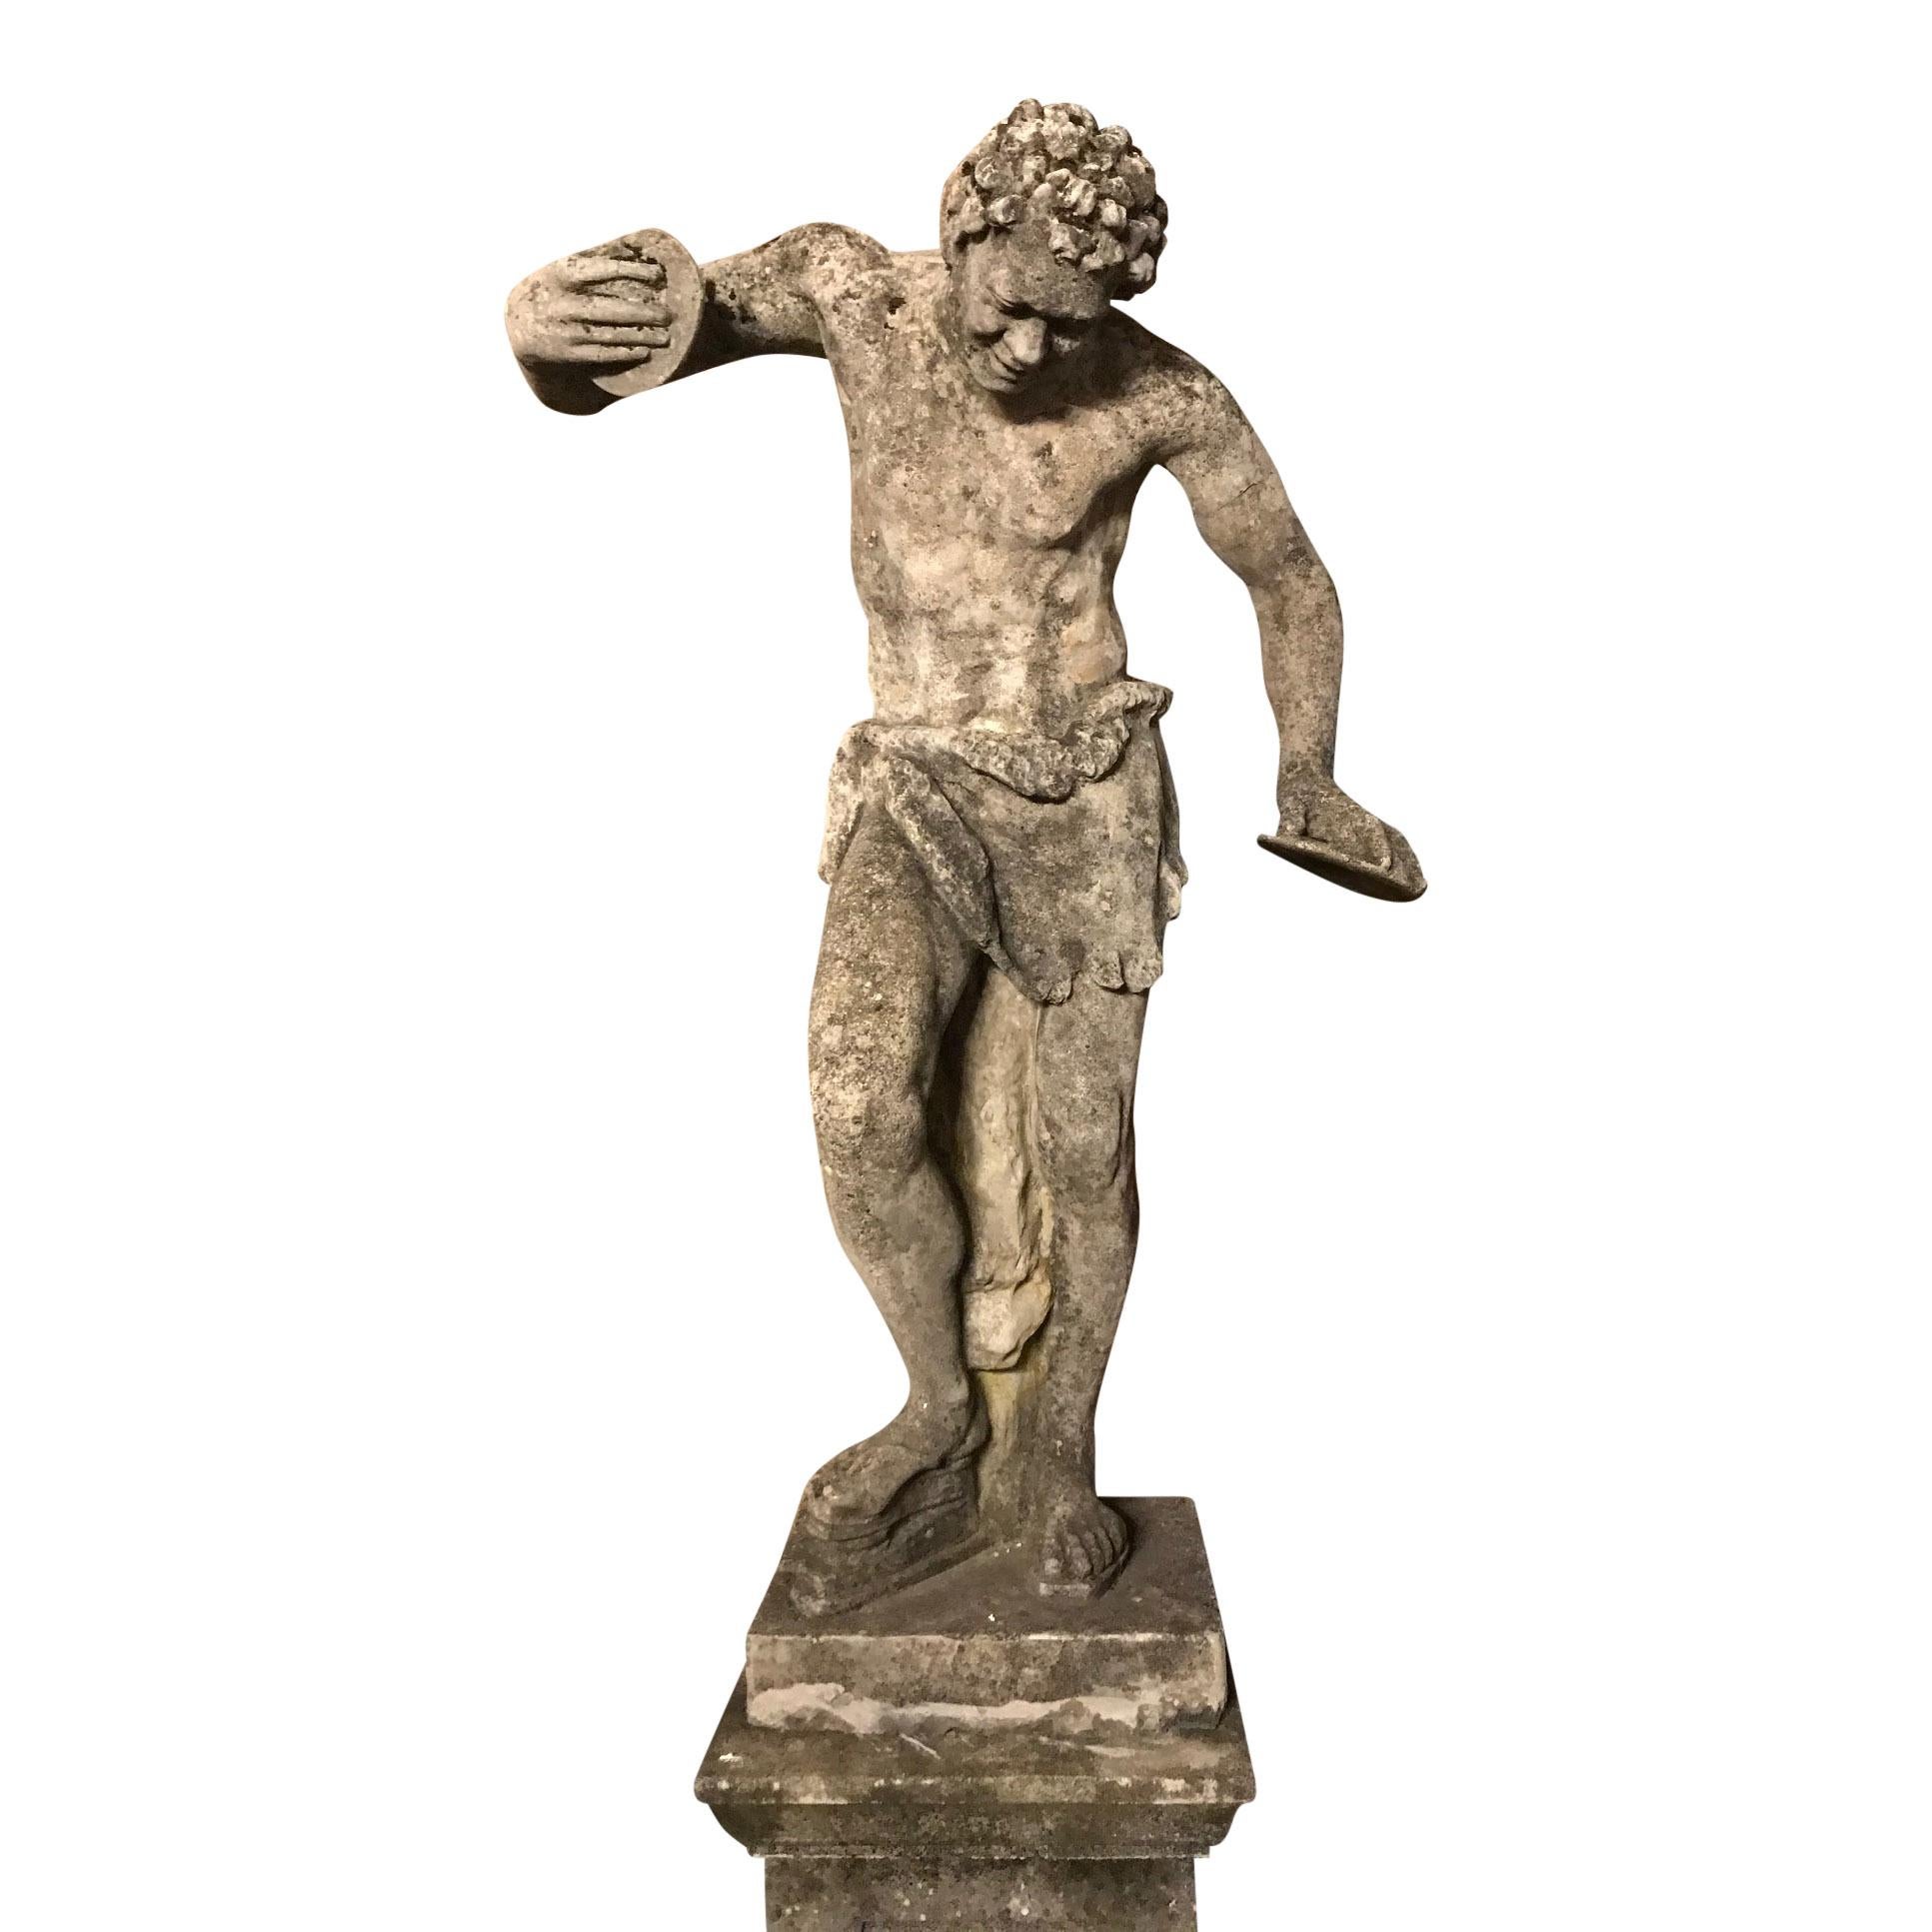 AFTER THE ANTIQUE, A LARGE COMPOSITION STONE FIGURE OF THE DANCING FAUN WITH CYMBOLS

20th century 
(Pedestal not included), 100cm wide, 34cm deep, 143cm high (39in wide, 13in deep, 56in high) and the base of the figure: 43cm wide x 34cm deep